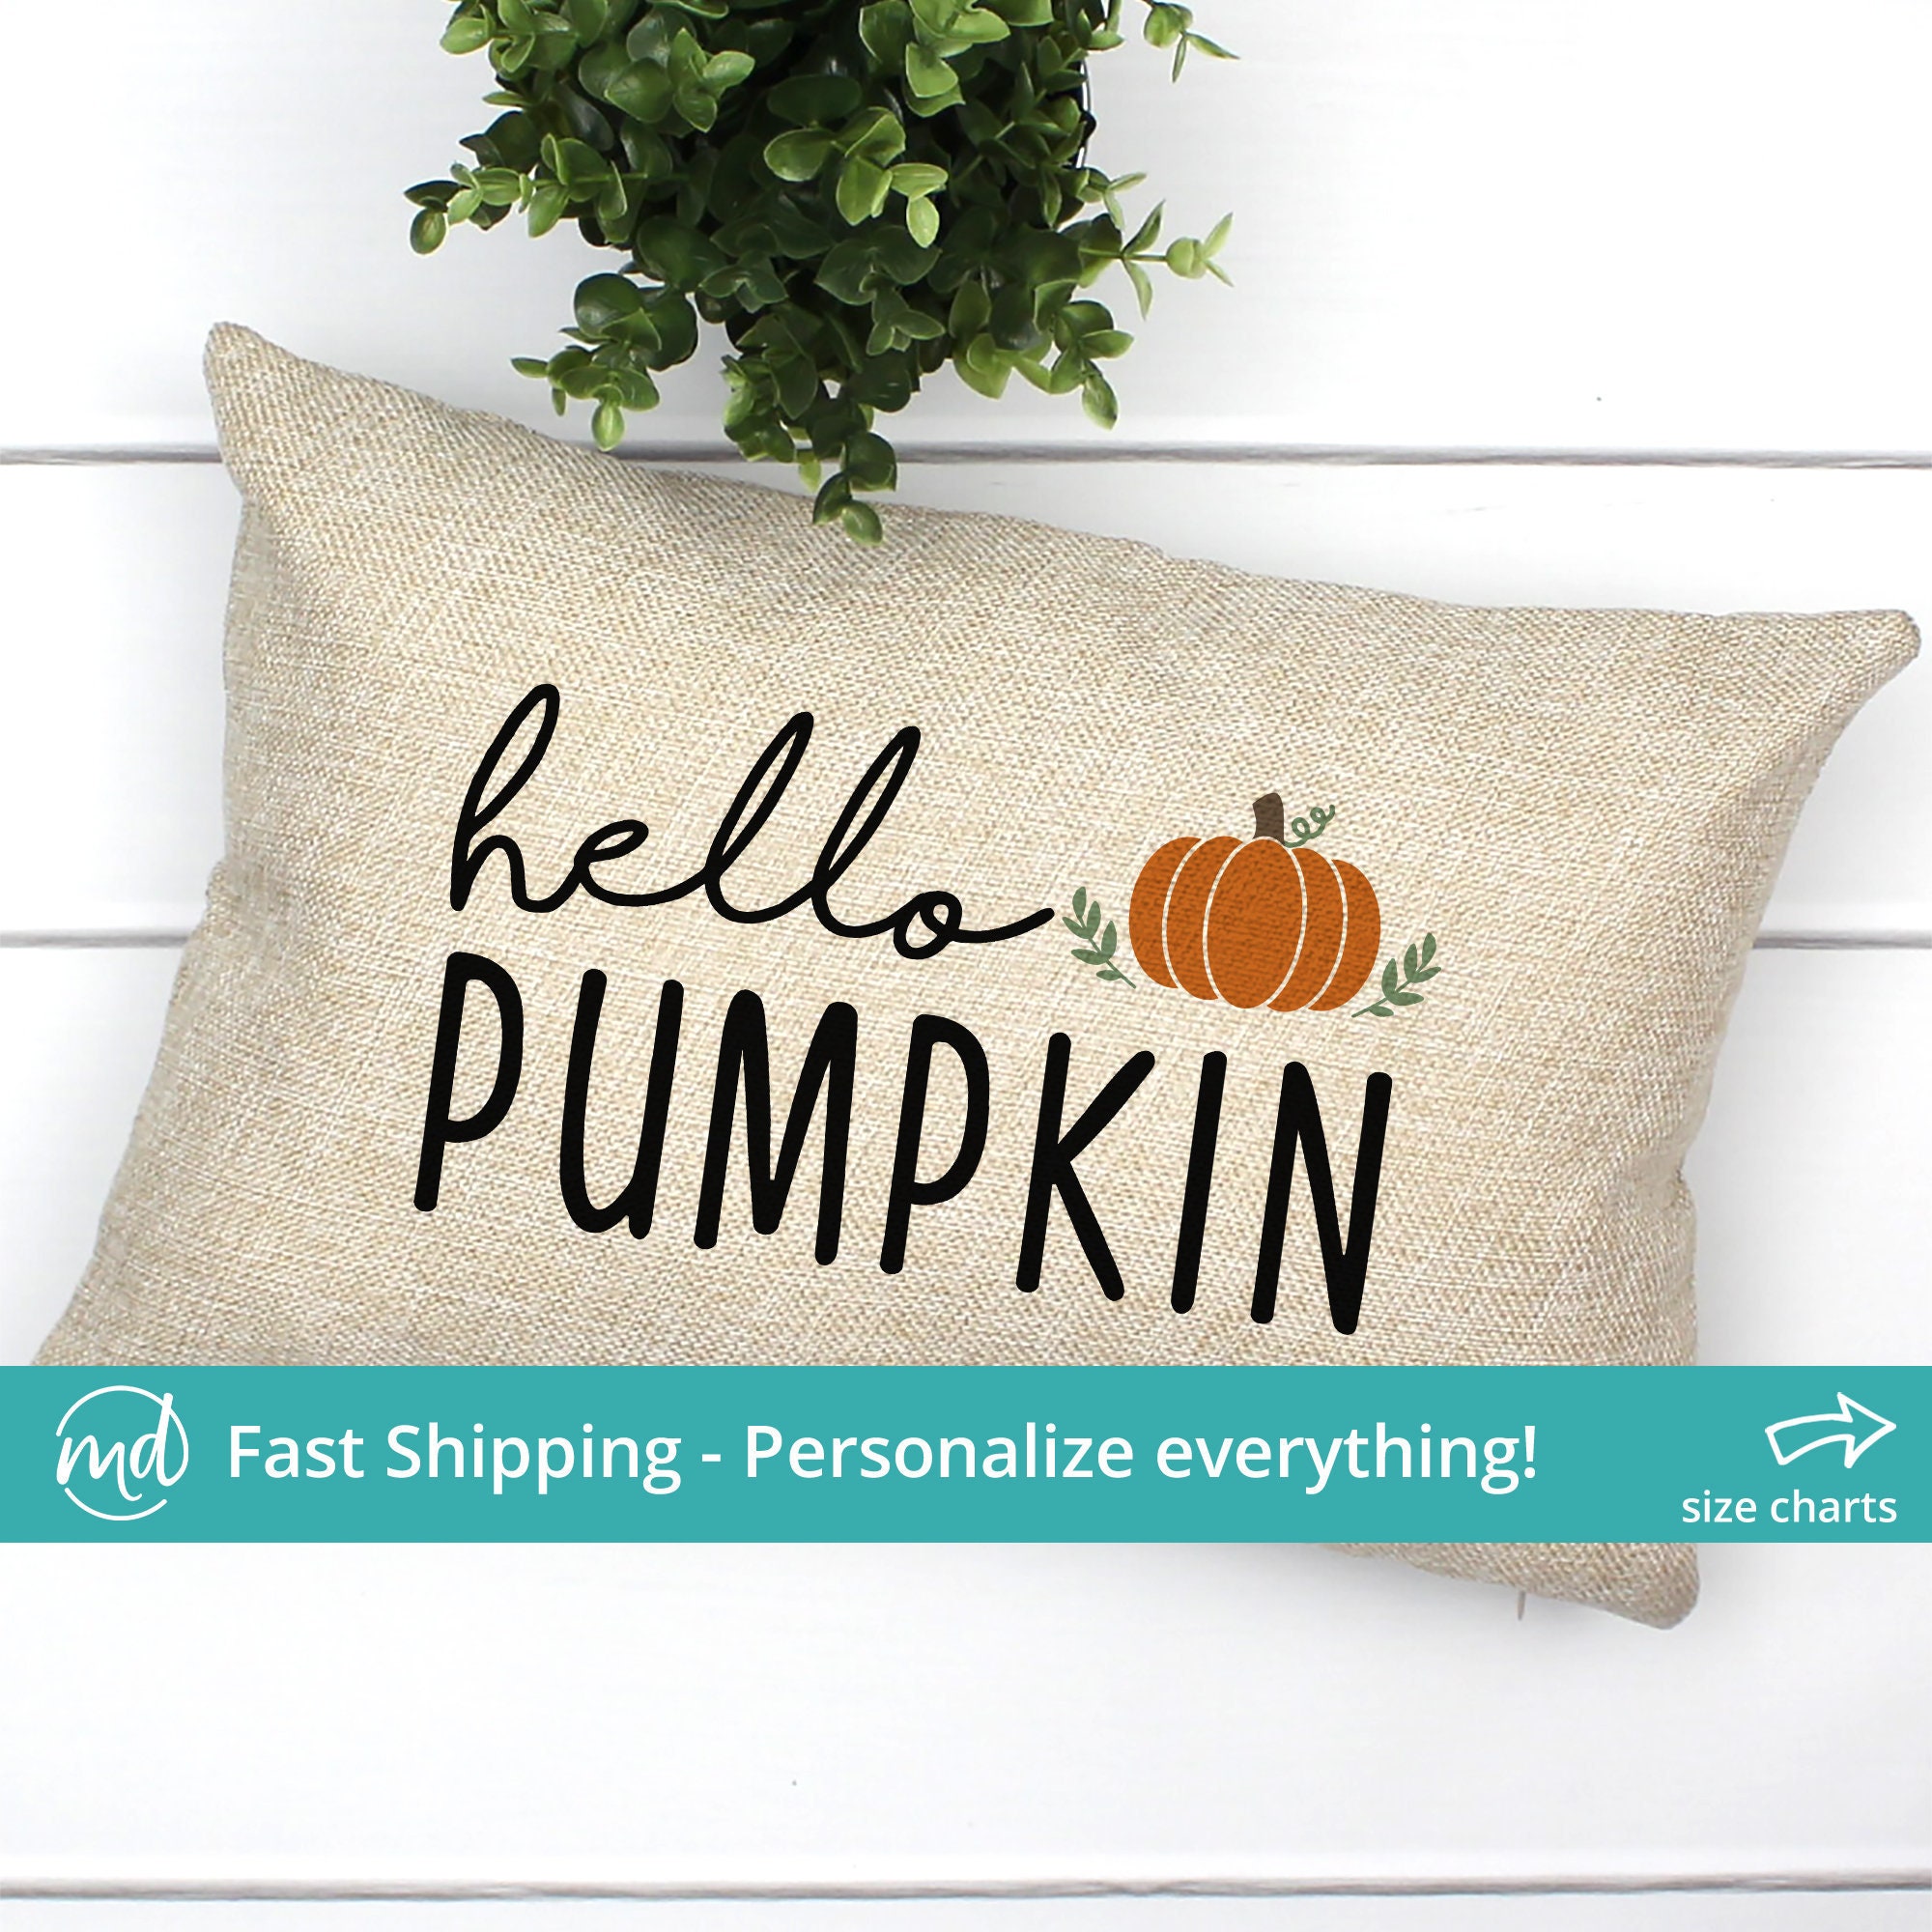 Sowder Happy Halloween Pumpkins Lumbar Pillow The Holiday Aisle Location: Indoor/Outdoor Use